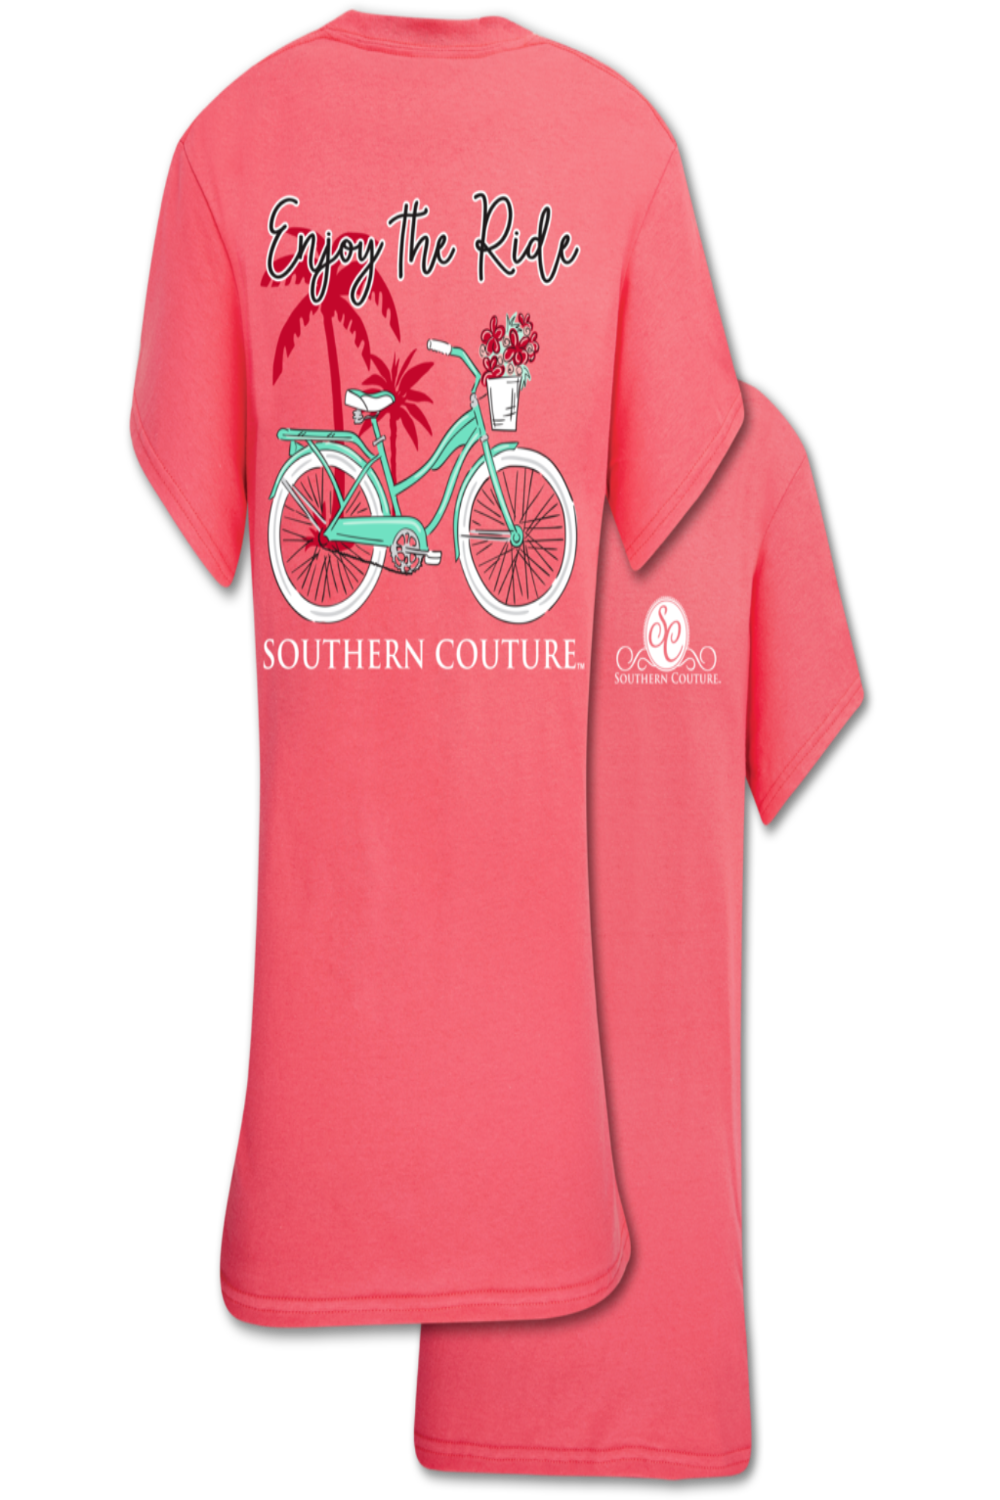 Enjoy The Ride Bike - Short Sleeve T-Shirt by Southern Couture